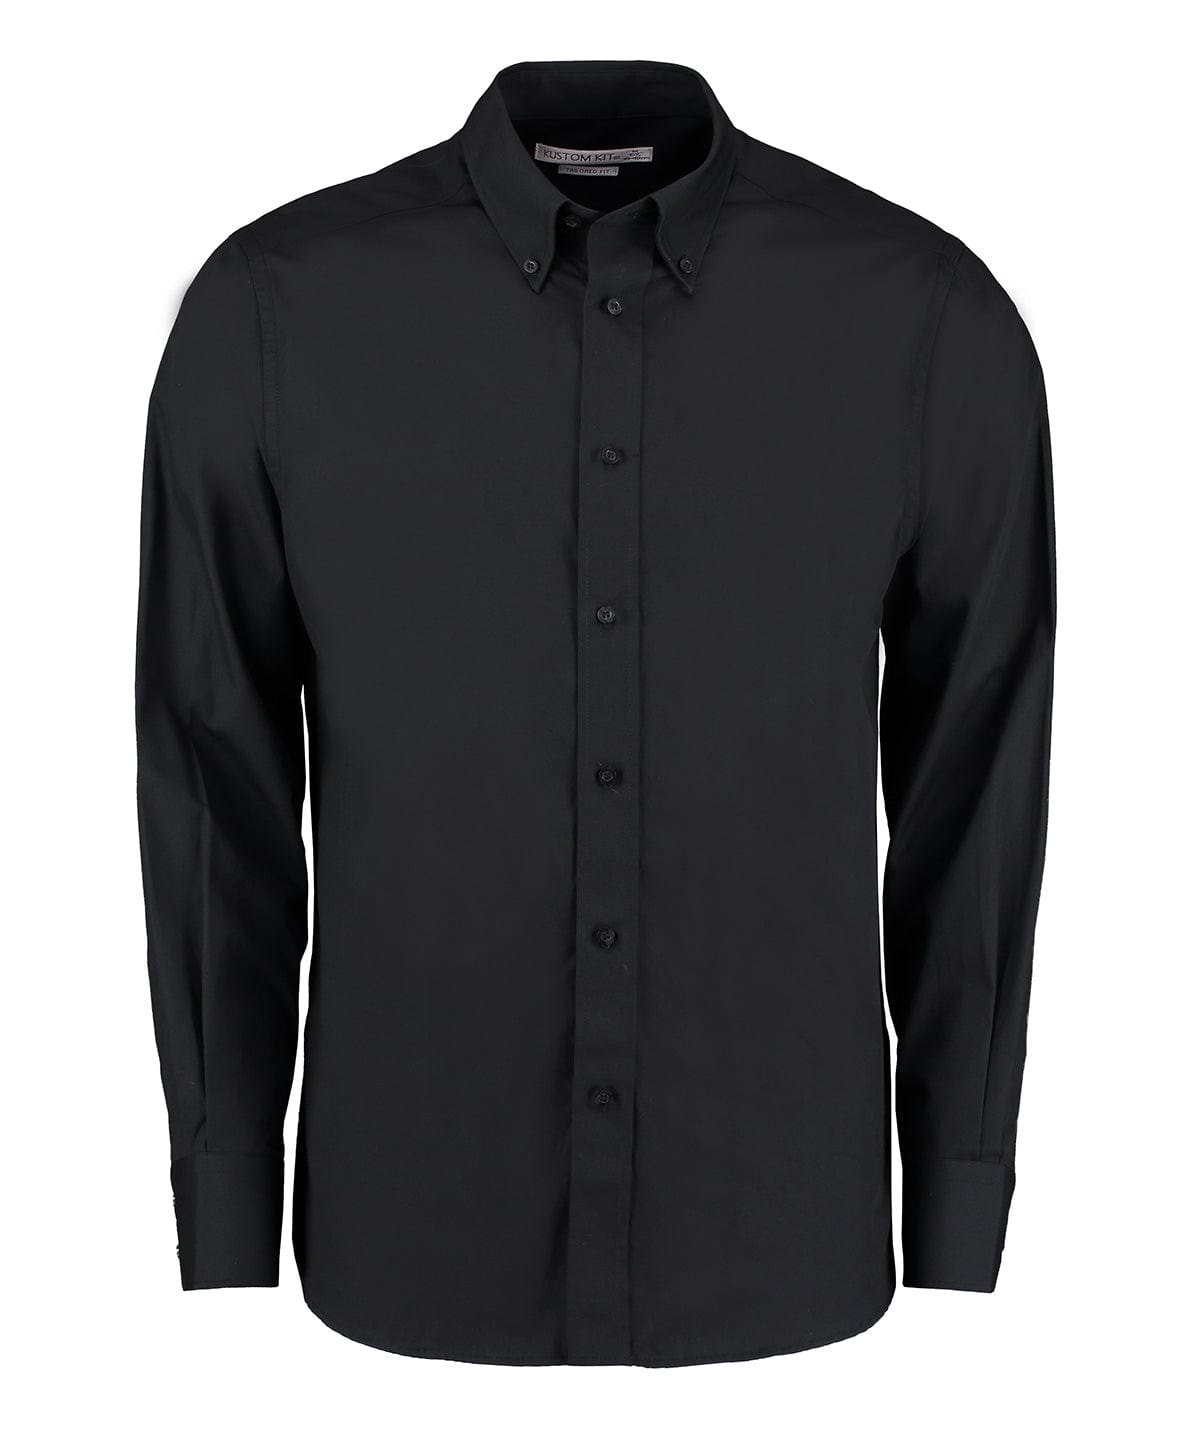 City business shirt long-sleeved (tailored fit) | Black